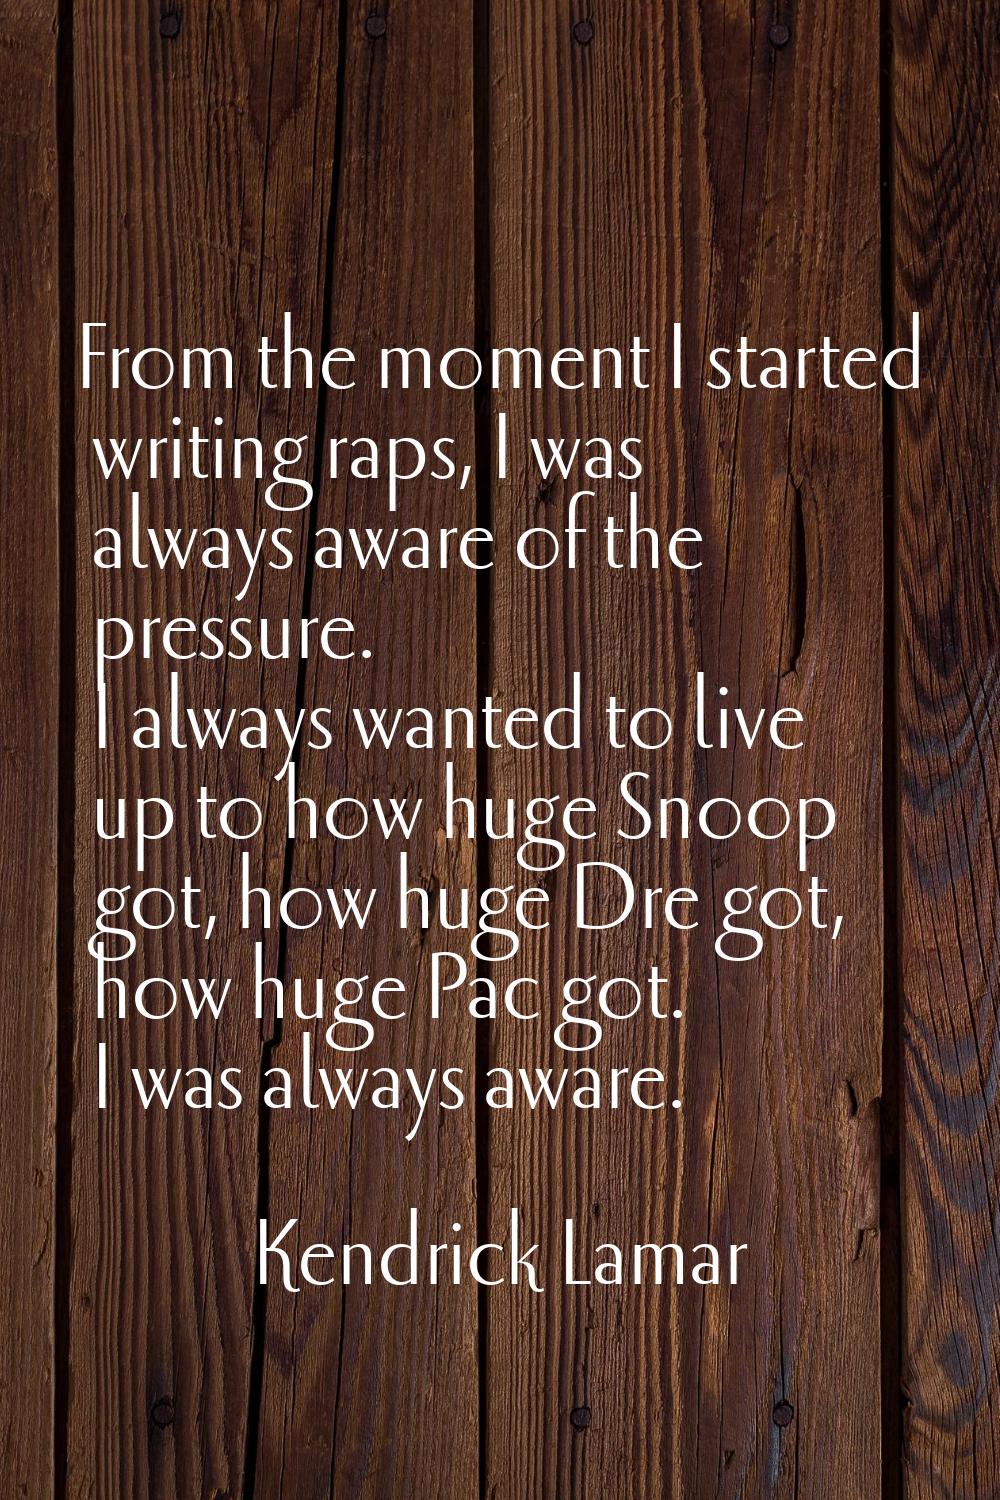 From the moment I started writing raps, I was always aware of the pressure. I always wanted to live